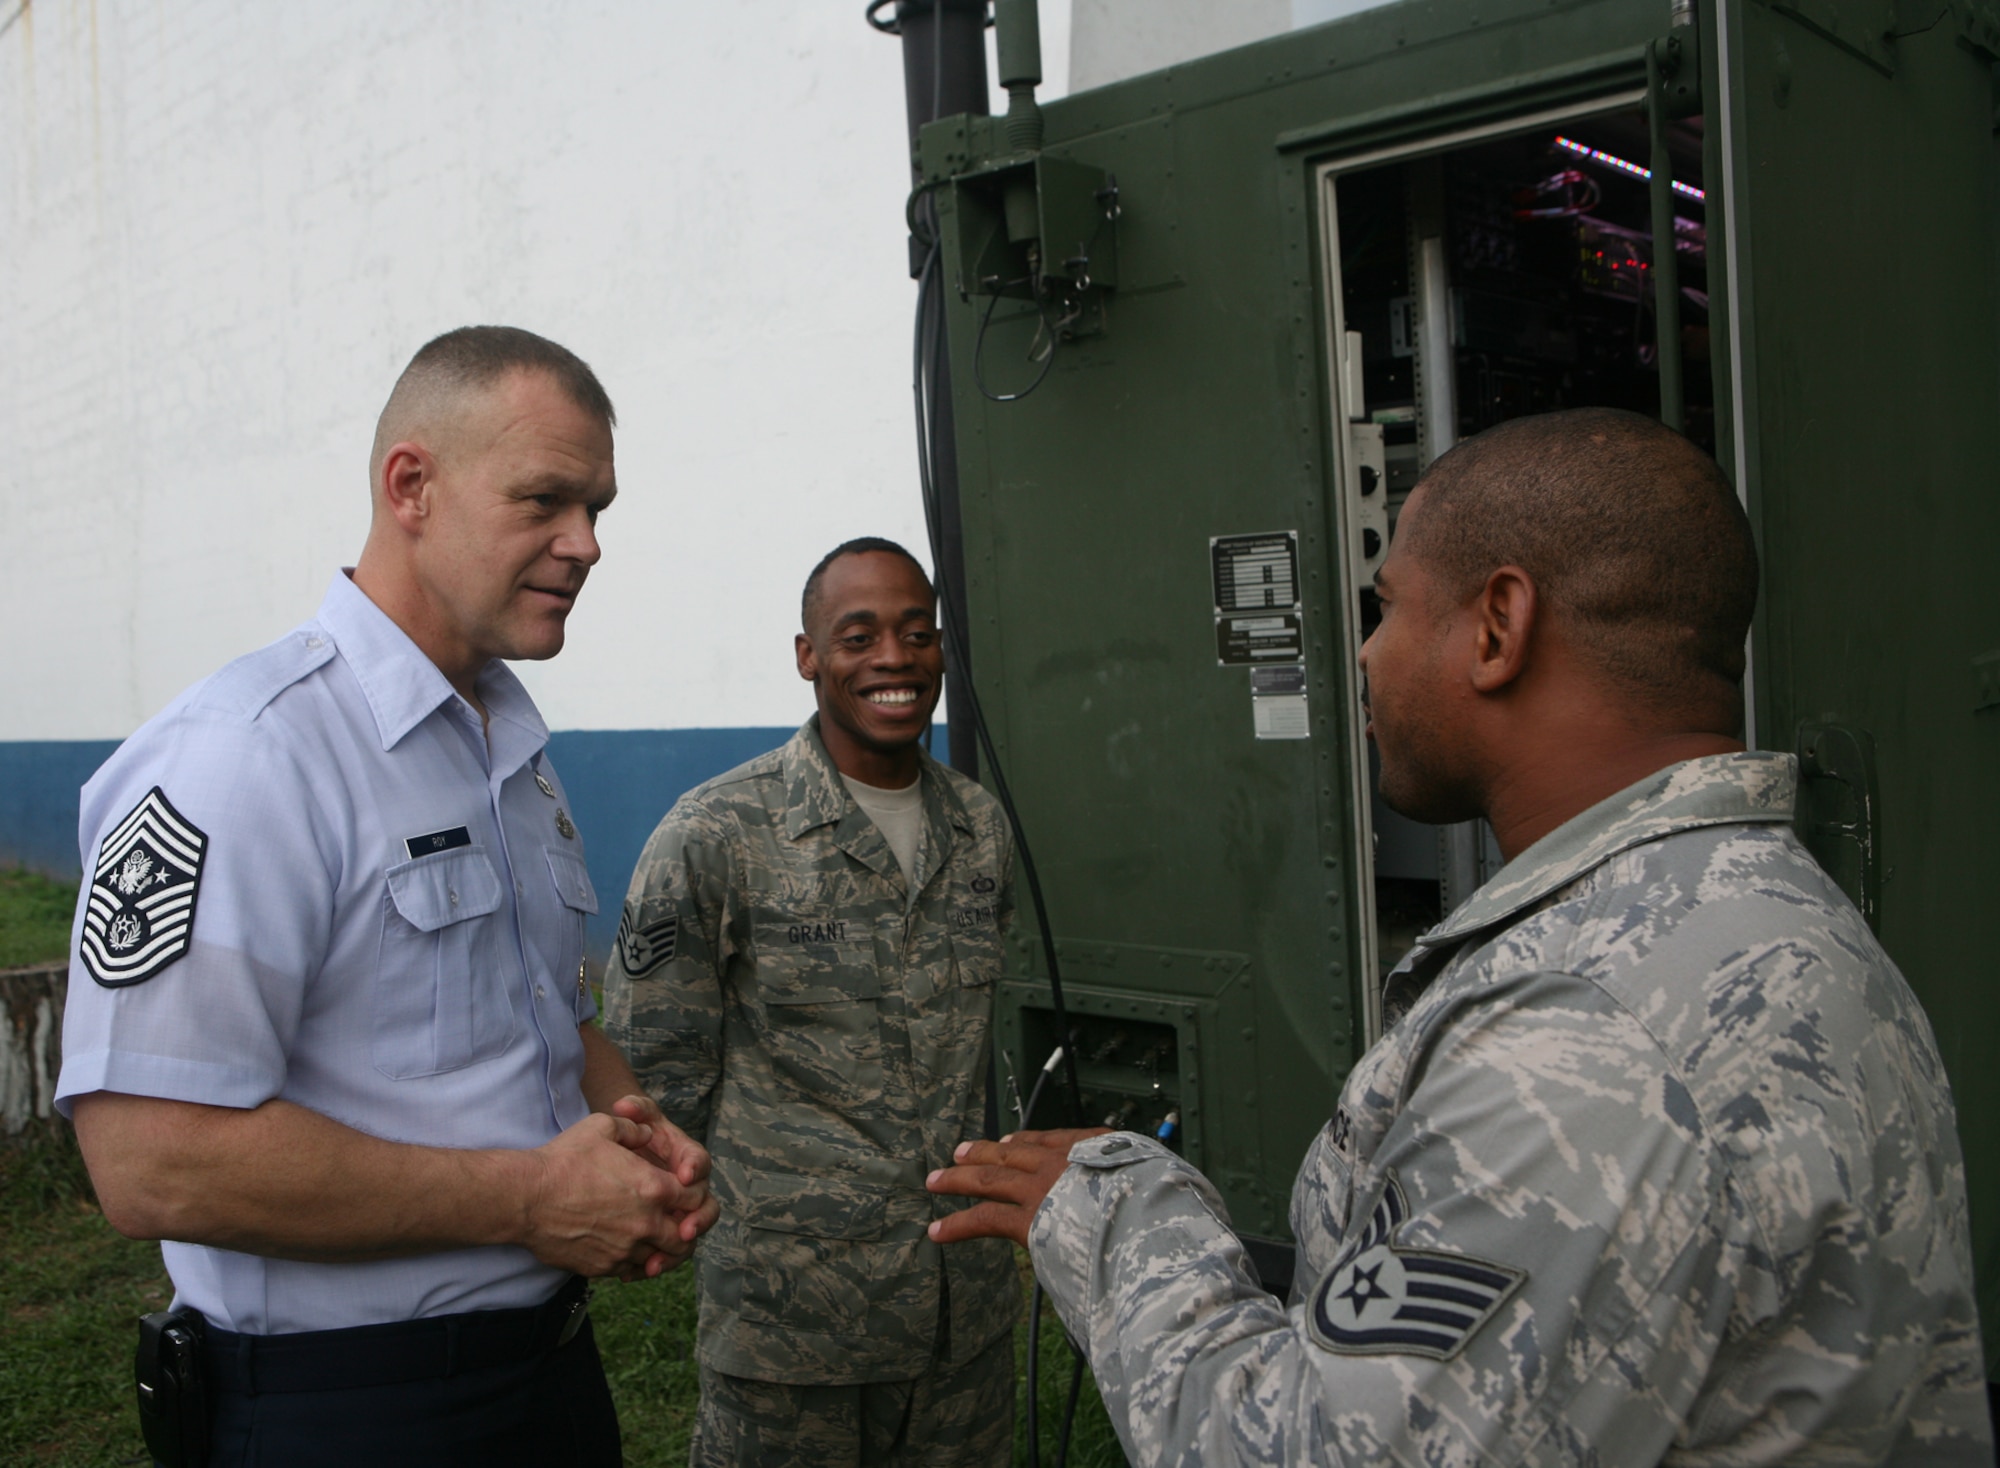 PANAMA CITY, Panama -- Chief Master Sgt. of the Air Force James A. Roy (left) speaks to Staff Sgt. Leighton Grant (center) and Staff Sgt. Rodney Hawkins during a visit with Airmen of the 612th Air Expeditionary Communications Squadron deployed at Capitán Juan Delgado Air Base during Fuerzas Aliadas PANAMAX 2009. FA PANAMAX 2009 is a multinational exercise with 20 participating countries tailored to the defense of the Panama Canal, involving over 4,500 personnel from the U. S. Southern Command area of focus. (U.S. Navy photo by Mass Communication Specialist 1st Class David P. Coleman)